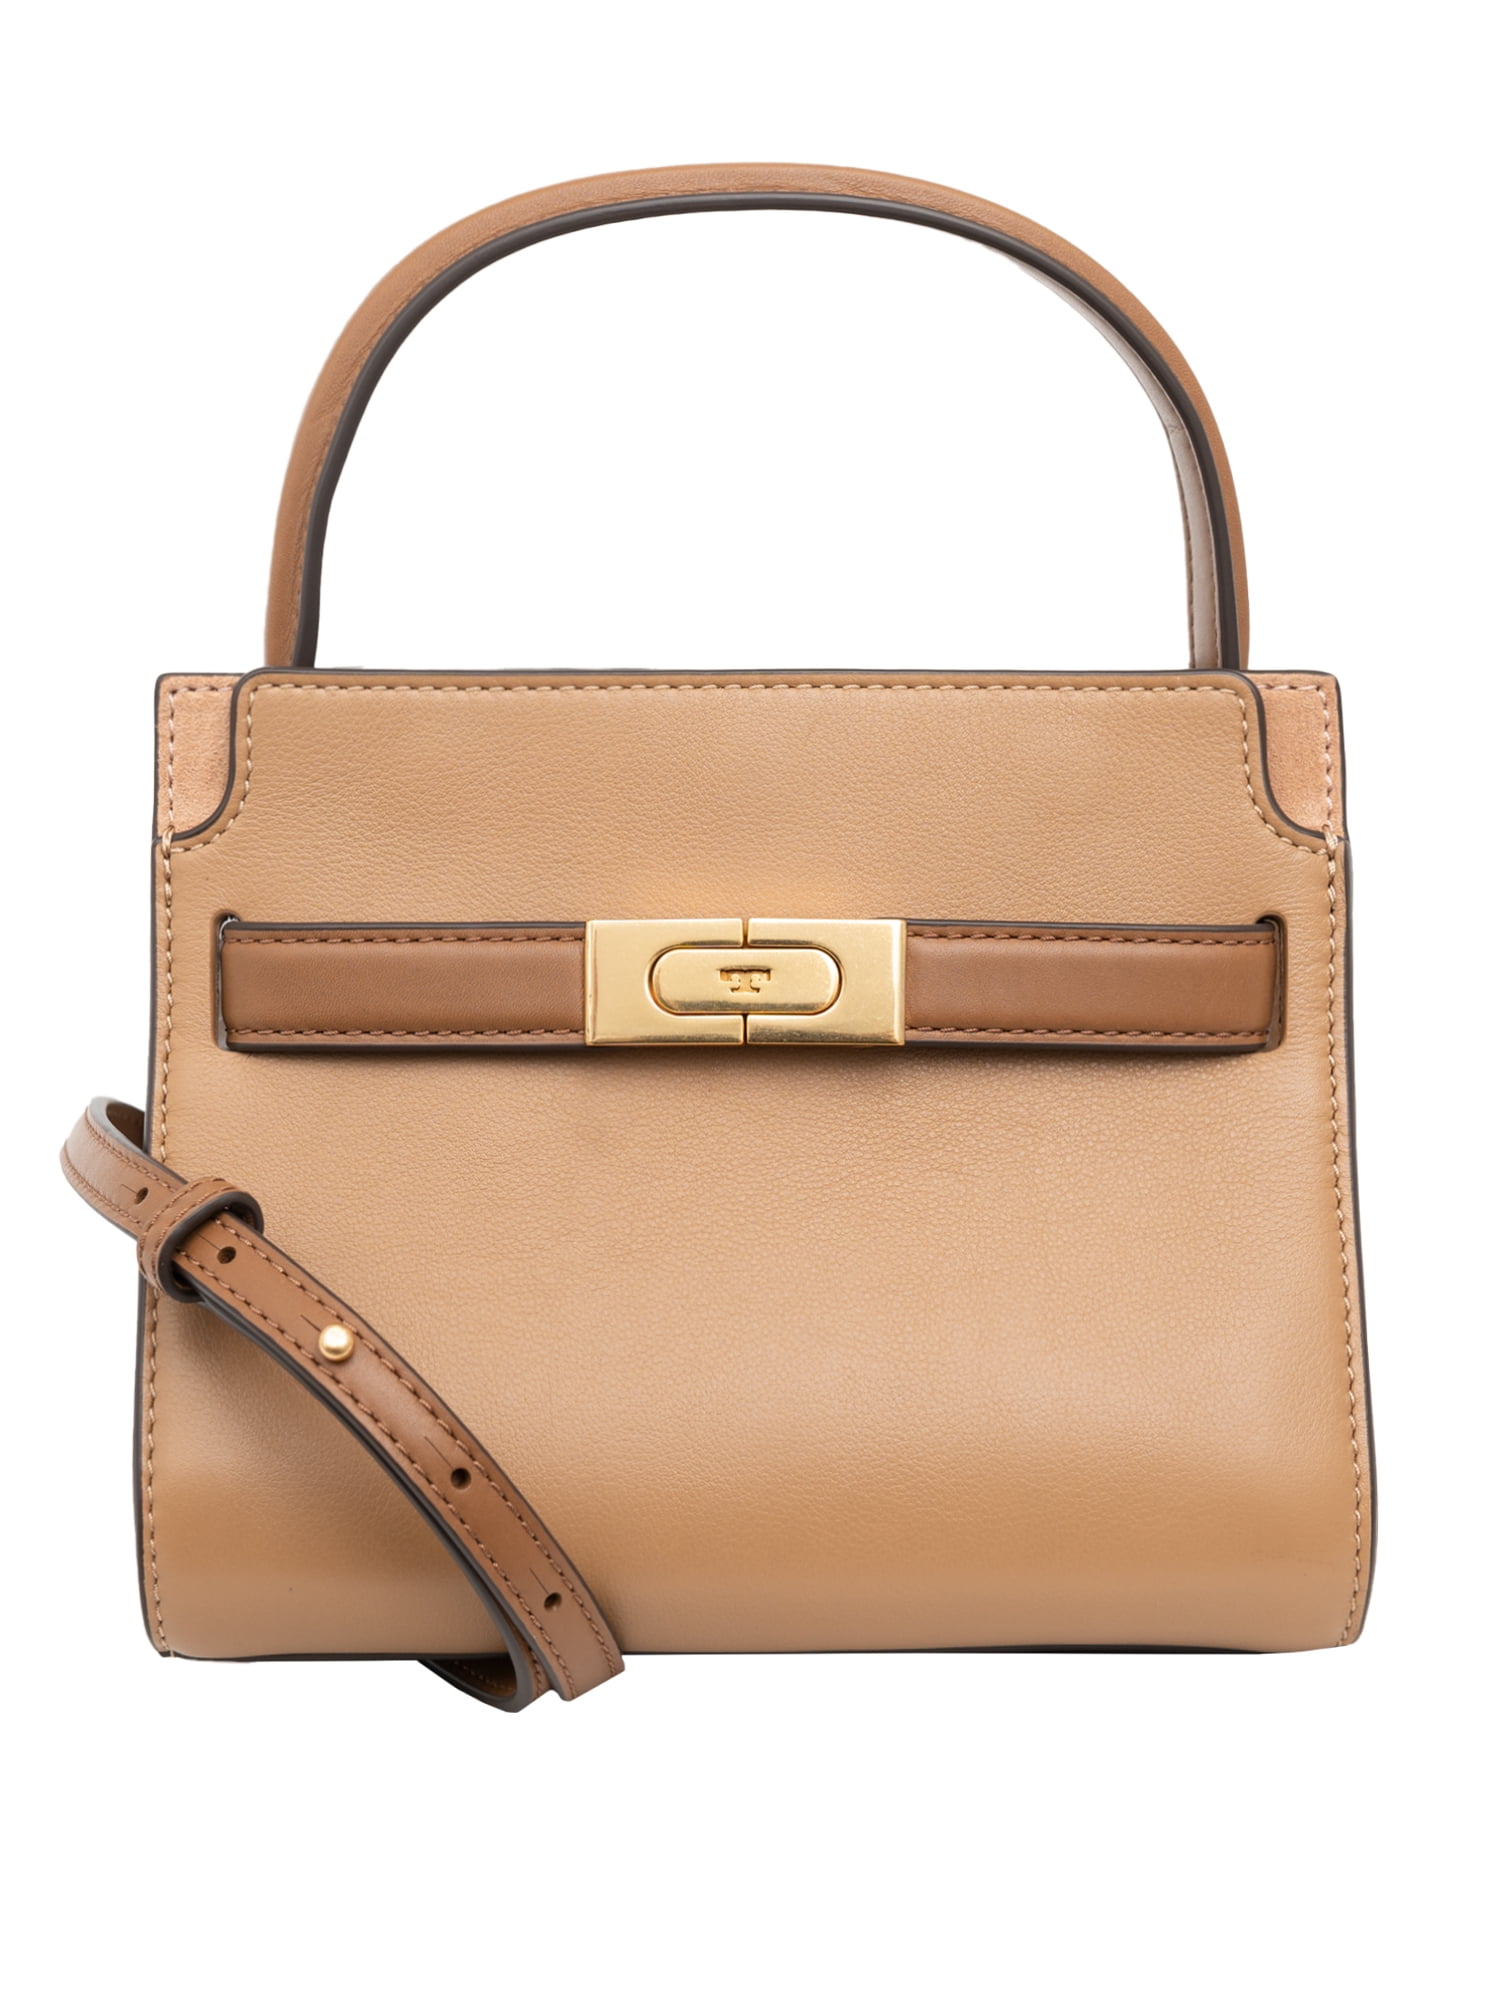 Tory Burch - Online exclusive: The Lee Radziwill Petite